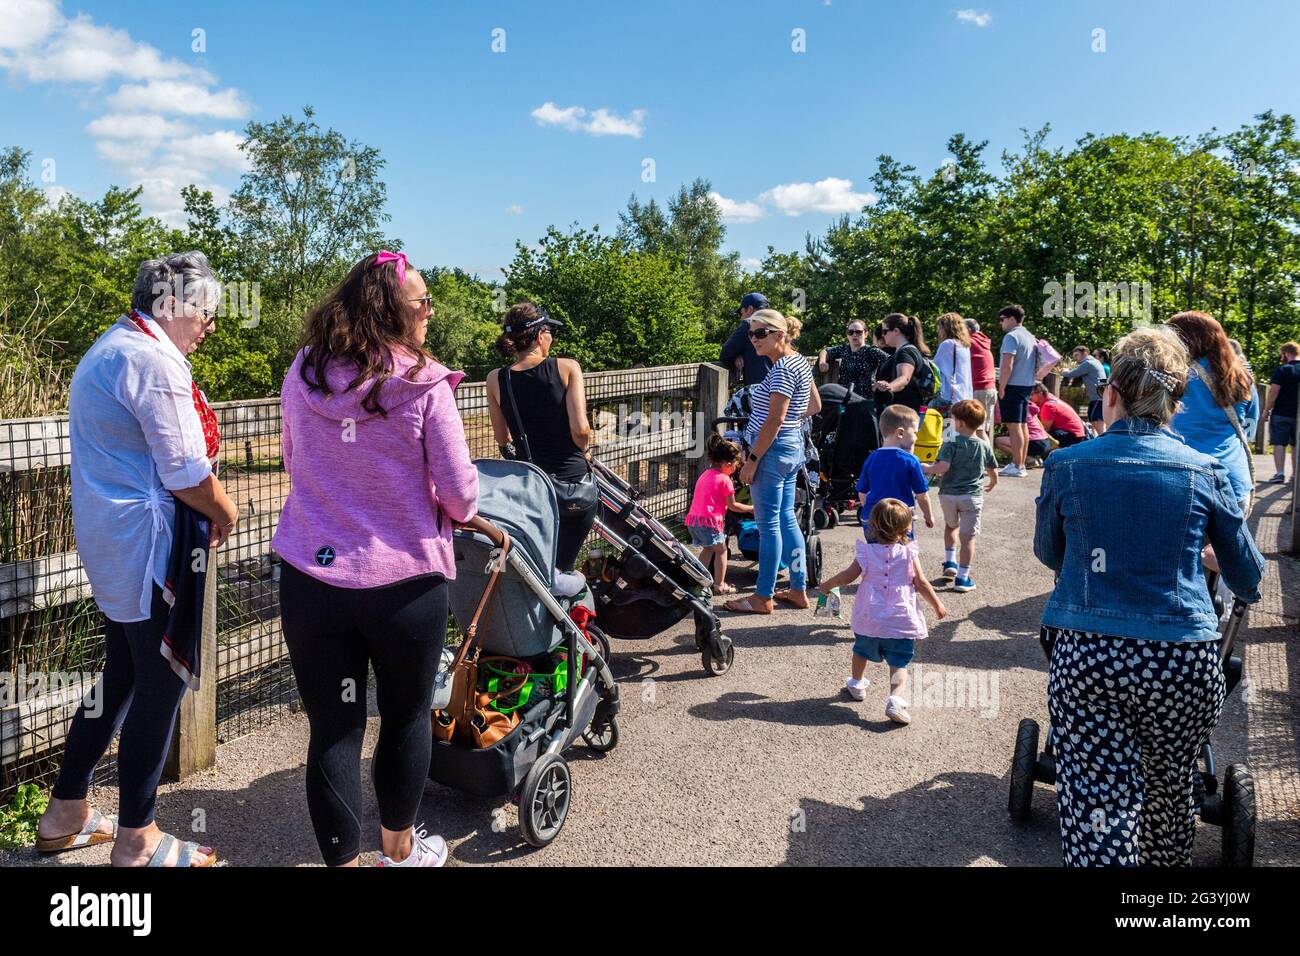 Cobh, County Cork, Ireland. 18th June, 2021. The sunny weather brought out lots of visitors to Fota Wildlife Park in Co. Cork today. Credit: AG Newds/Alamy Live News. Stock Photo